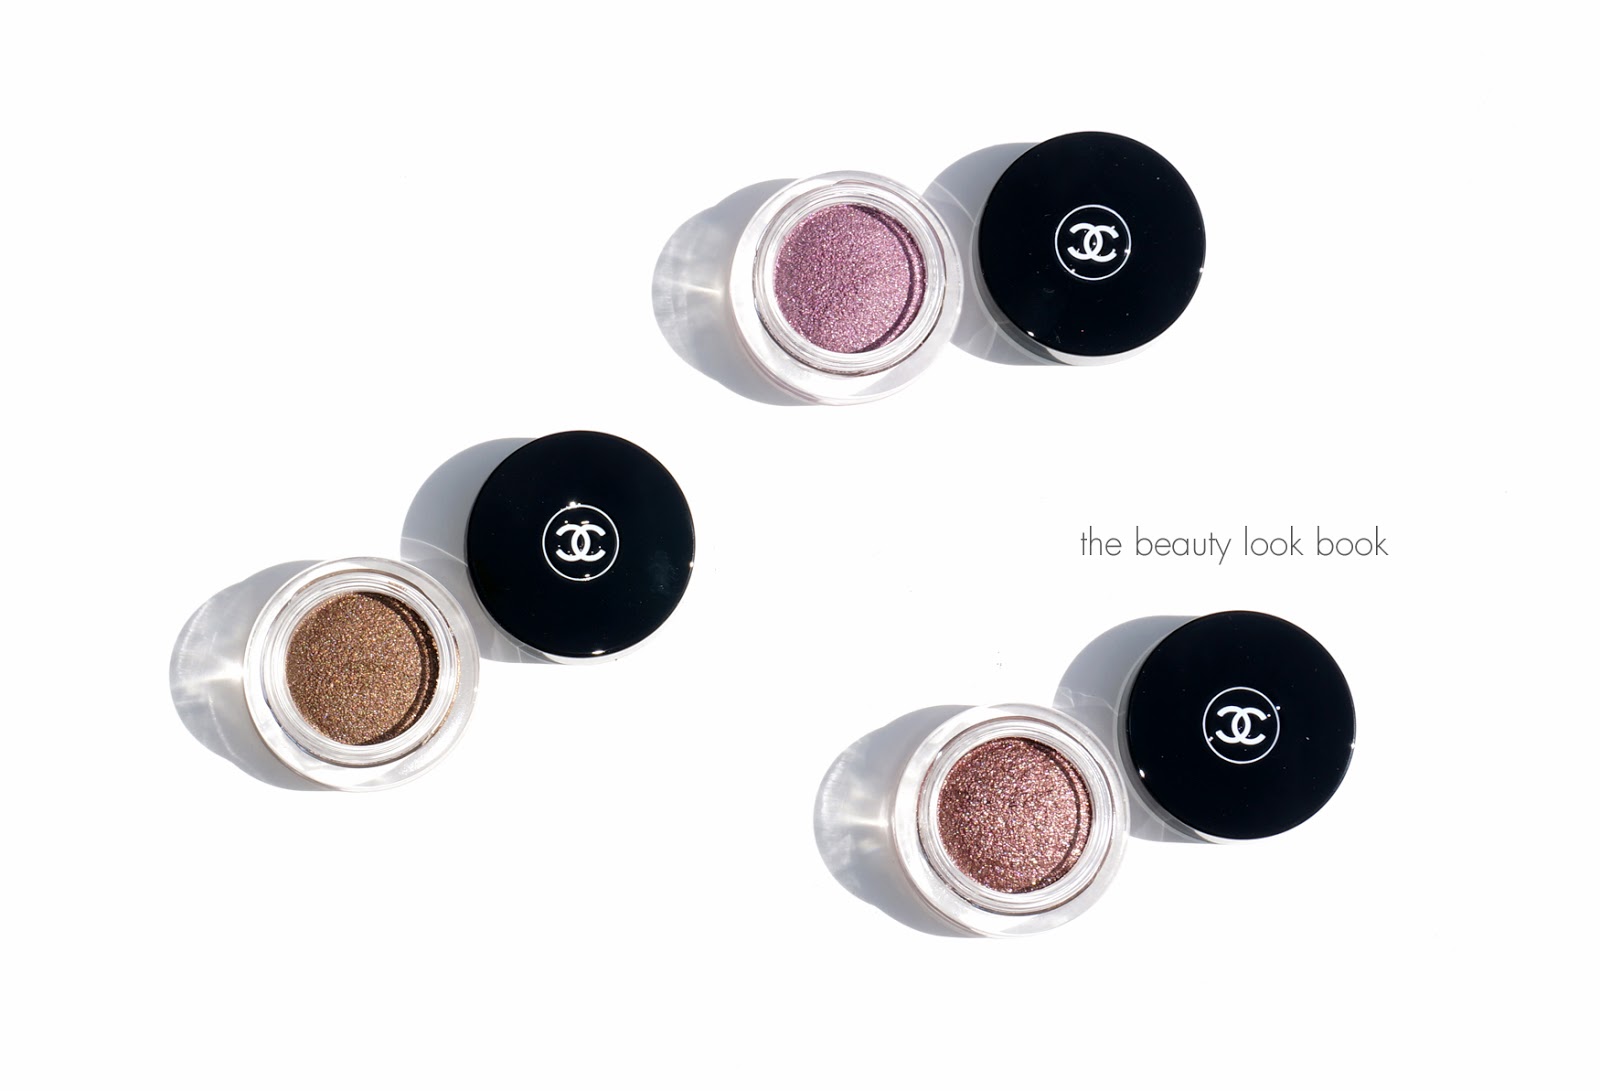 Chanel Convoitise Illusion D'Ombre Long Wear Luminous Eyeshadow